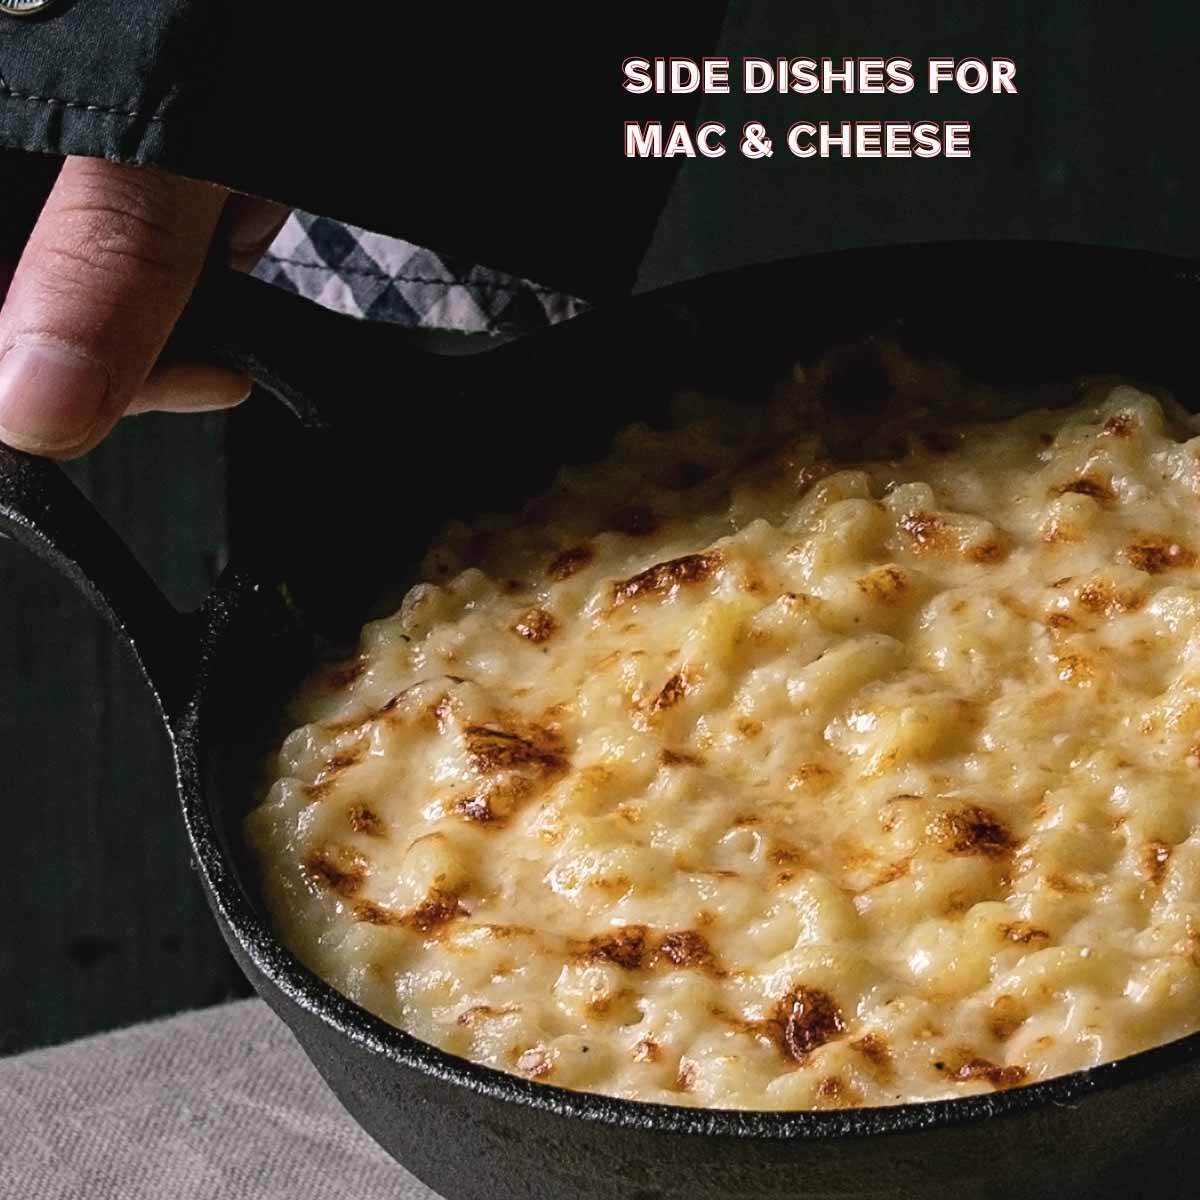 Mac and cheese is decadent but straightforward. It always satisfies your cheese cravings. Yet, even as every bite fills your mouth, mac and cheese still need something else to make it transform into a full meal.